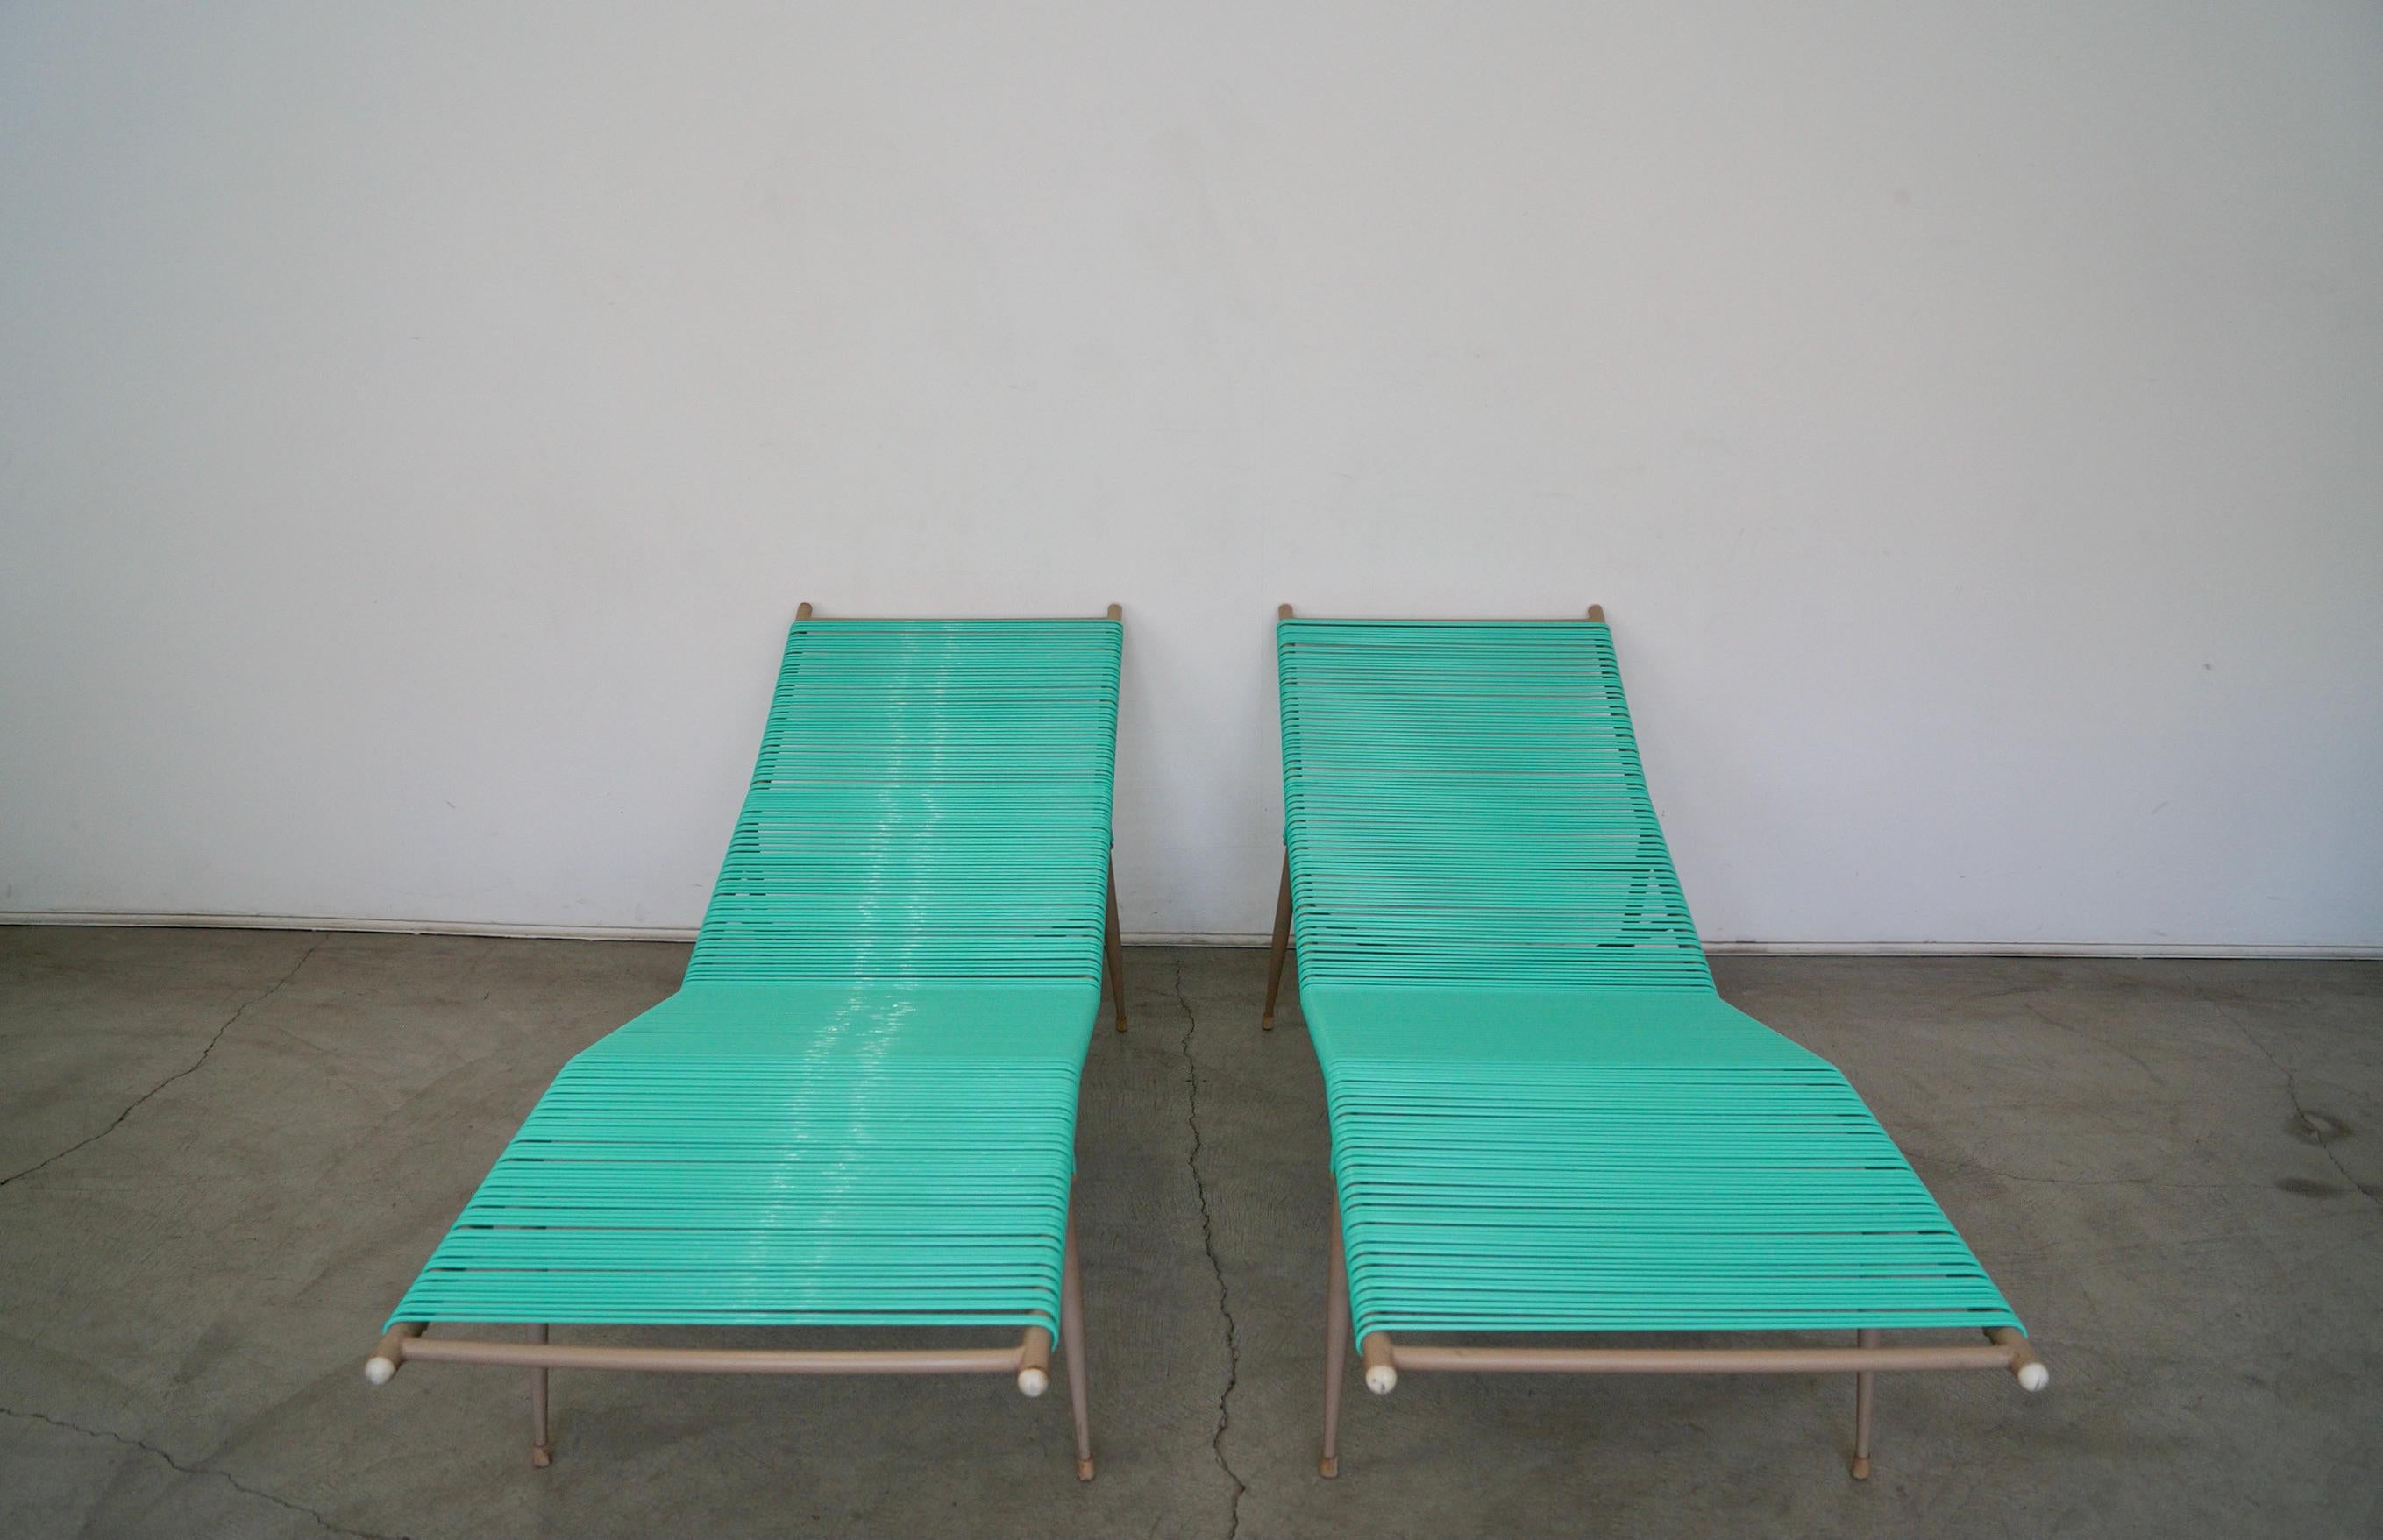 Pair of original Mid-Century Modern outdoor chaise lounge chairs for sale. From the 1960's, and have been newly wrapped with teal vinyl cording. The frames have the original finish and are in excellent condition. The teal and grayish metal finish